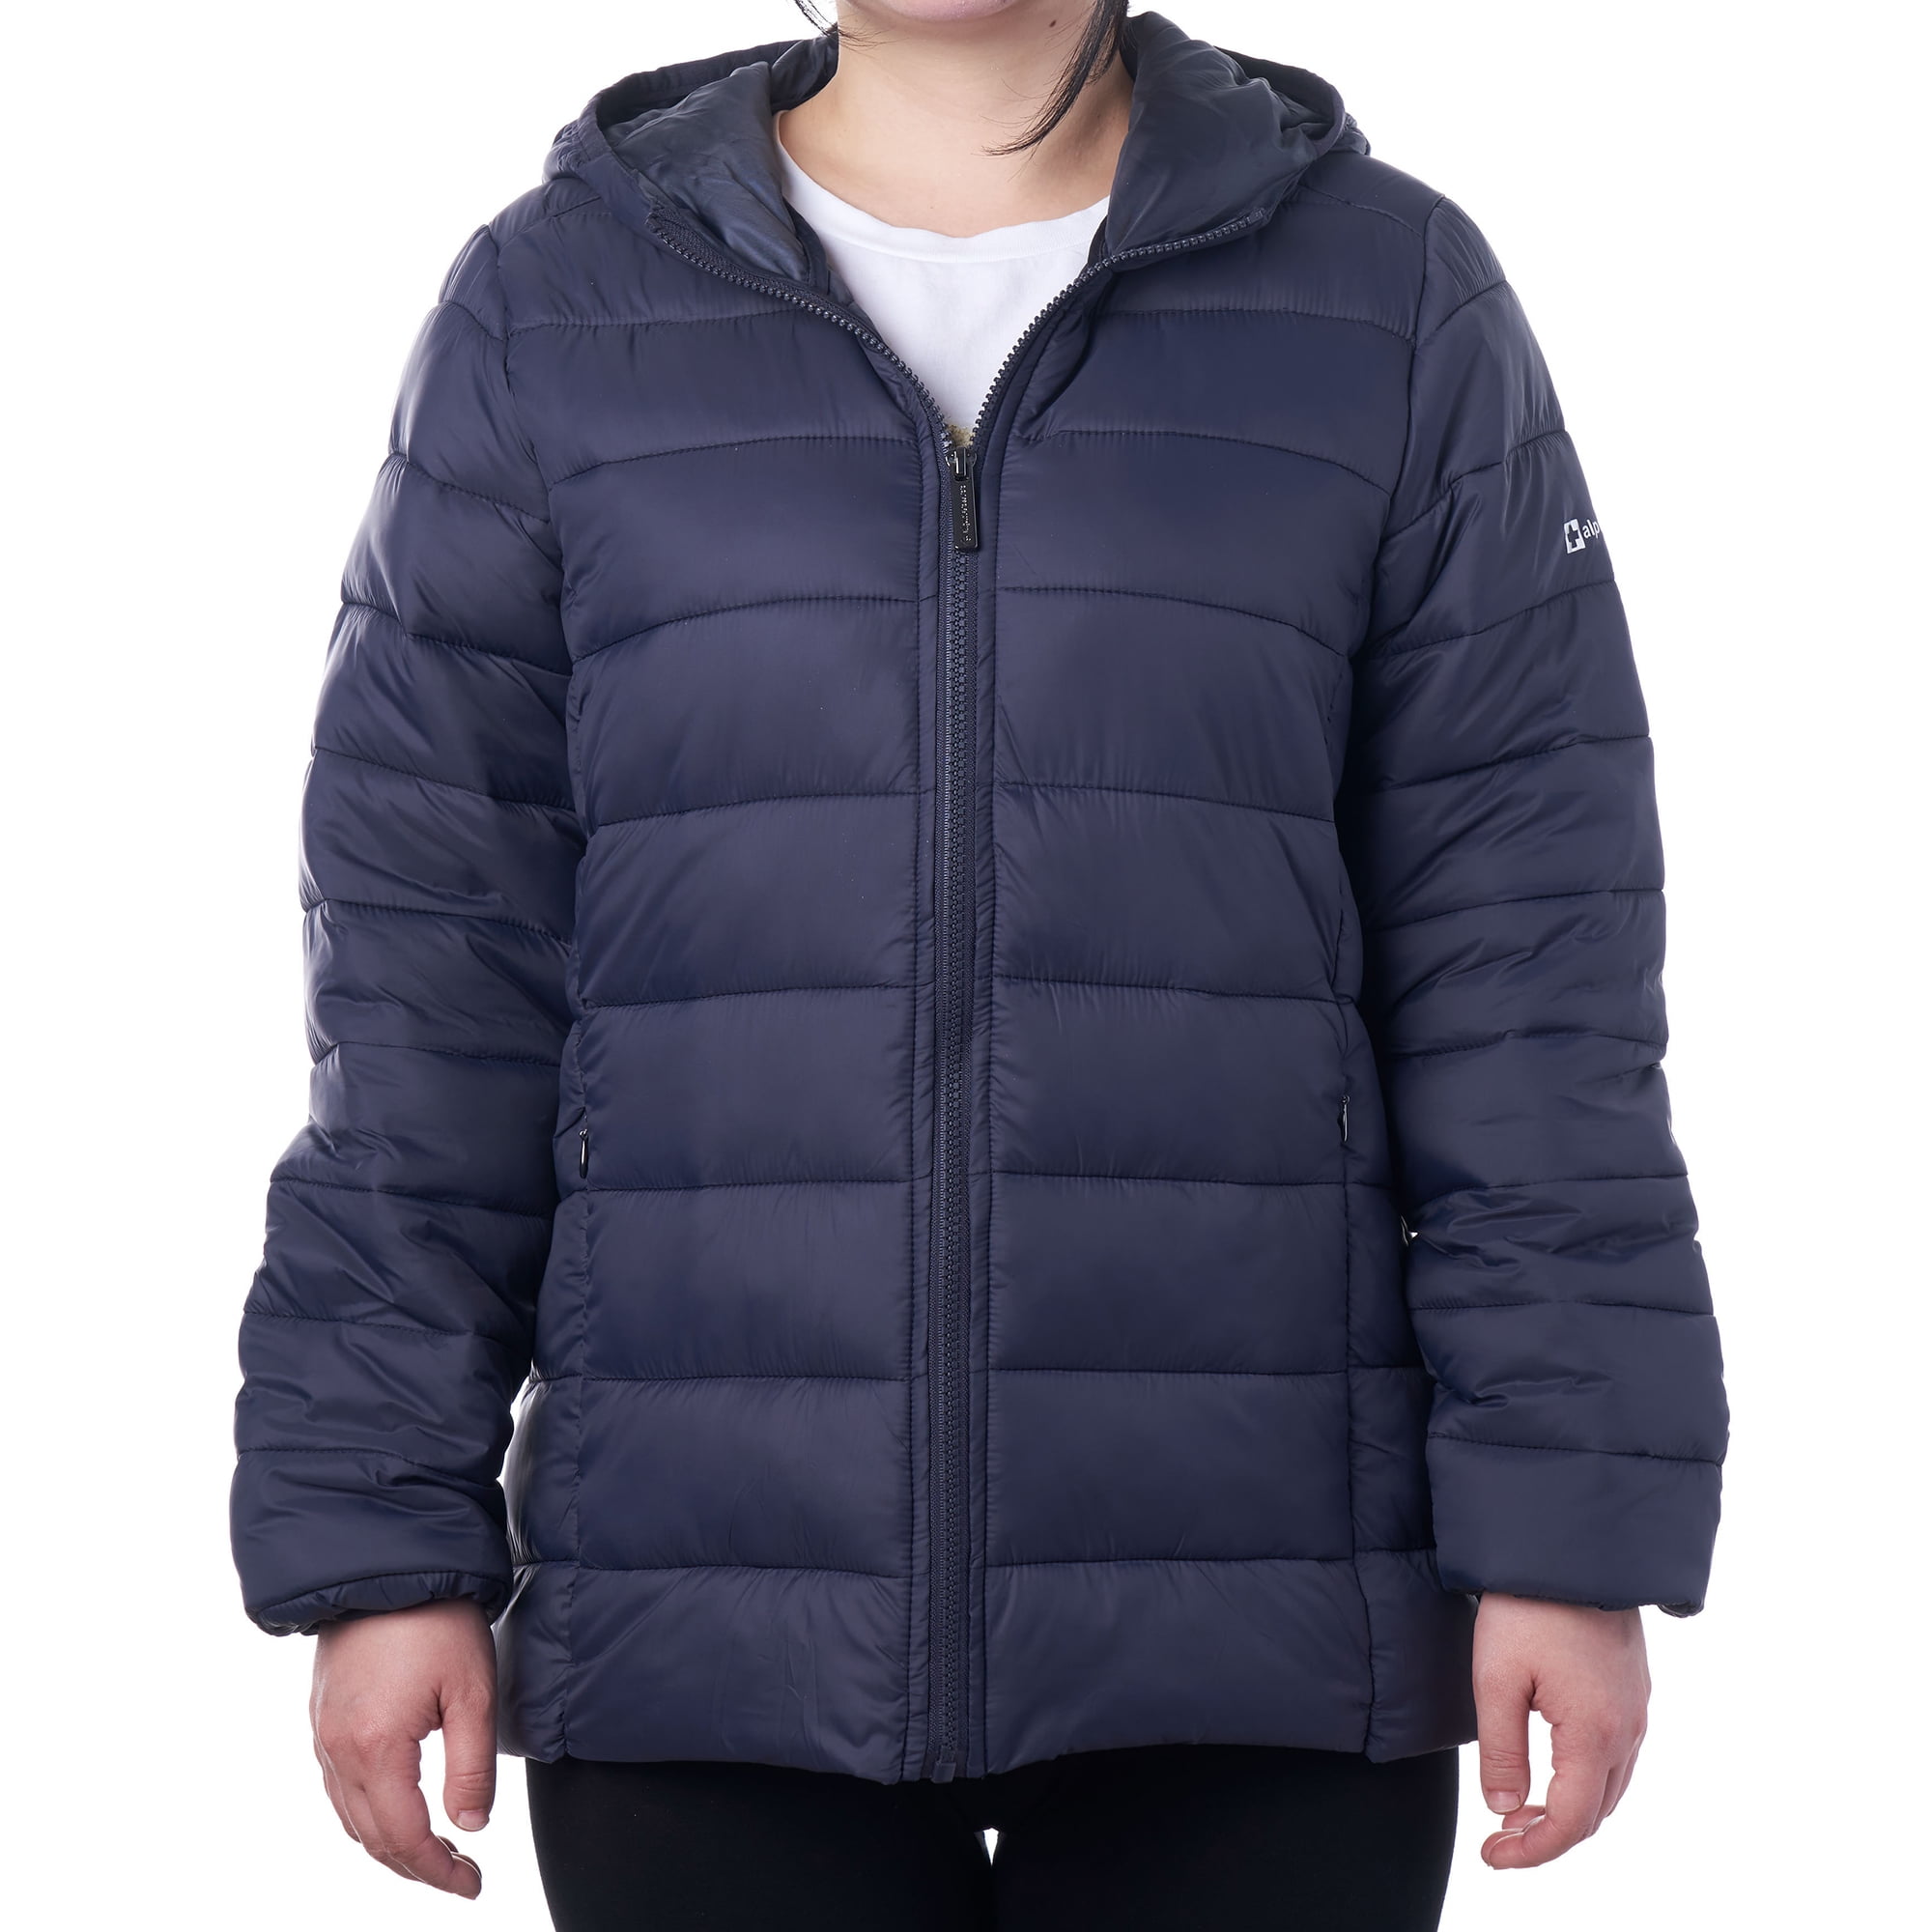 A woman wearing a white t-shirt, black yoga pants, and a navy Alpine Swiss Eva Women’s Hooded Puffer Down Jacket